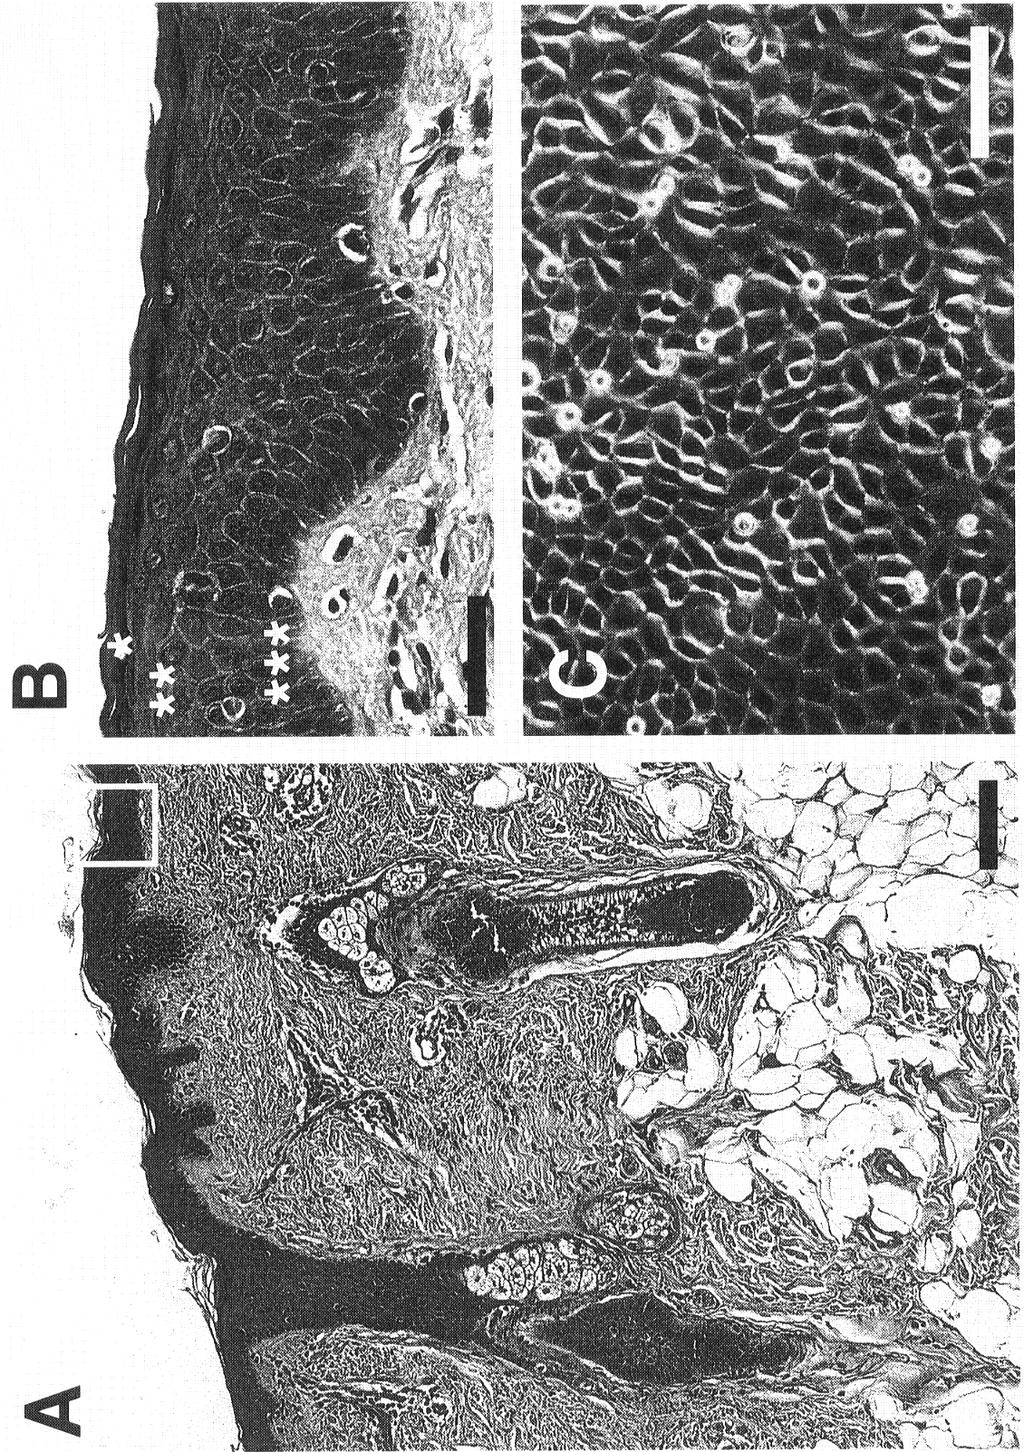 Fig. 2. Heterogeneous structure of the epidermis is constructed of one type of cell, keratinocyte. A: Light microscopic observation of the whole human skin. White box, top right, is the epidermis.